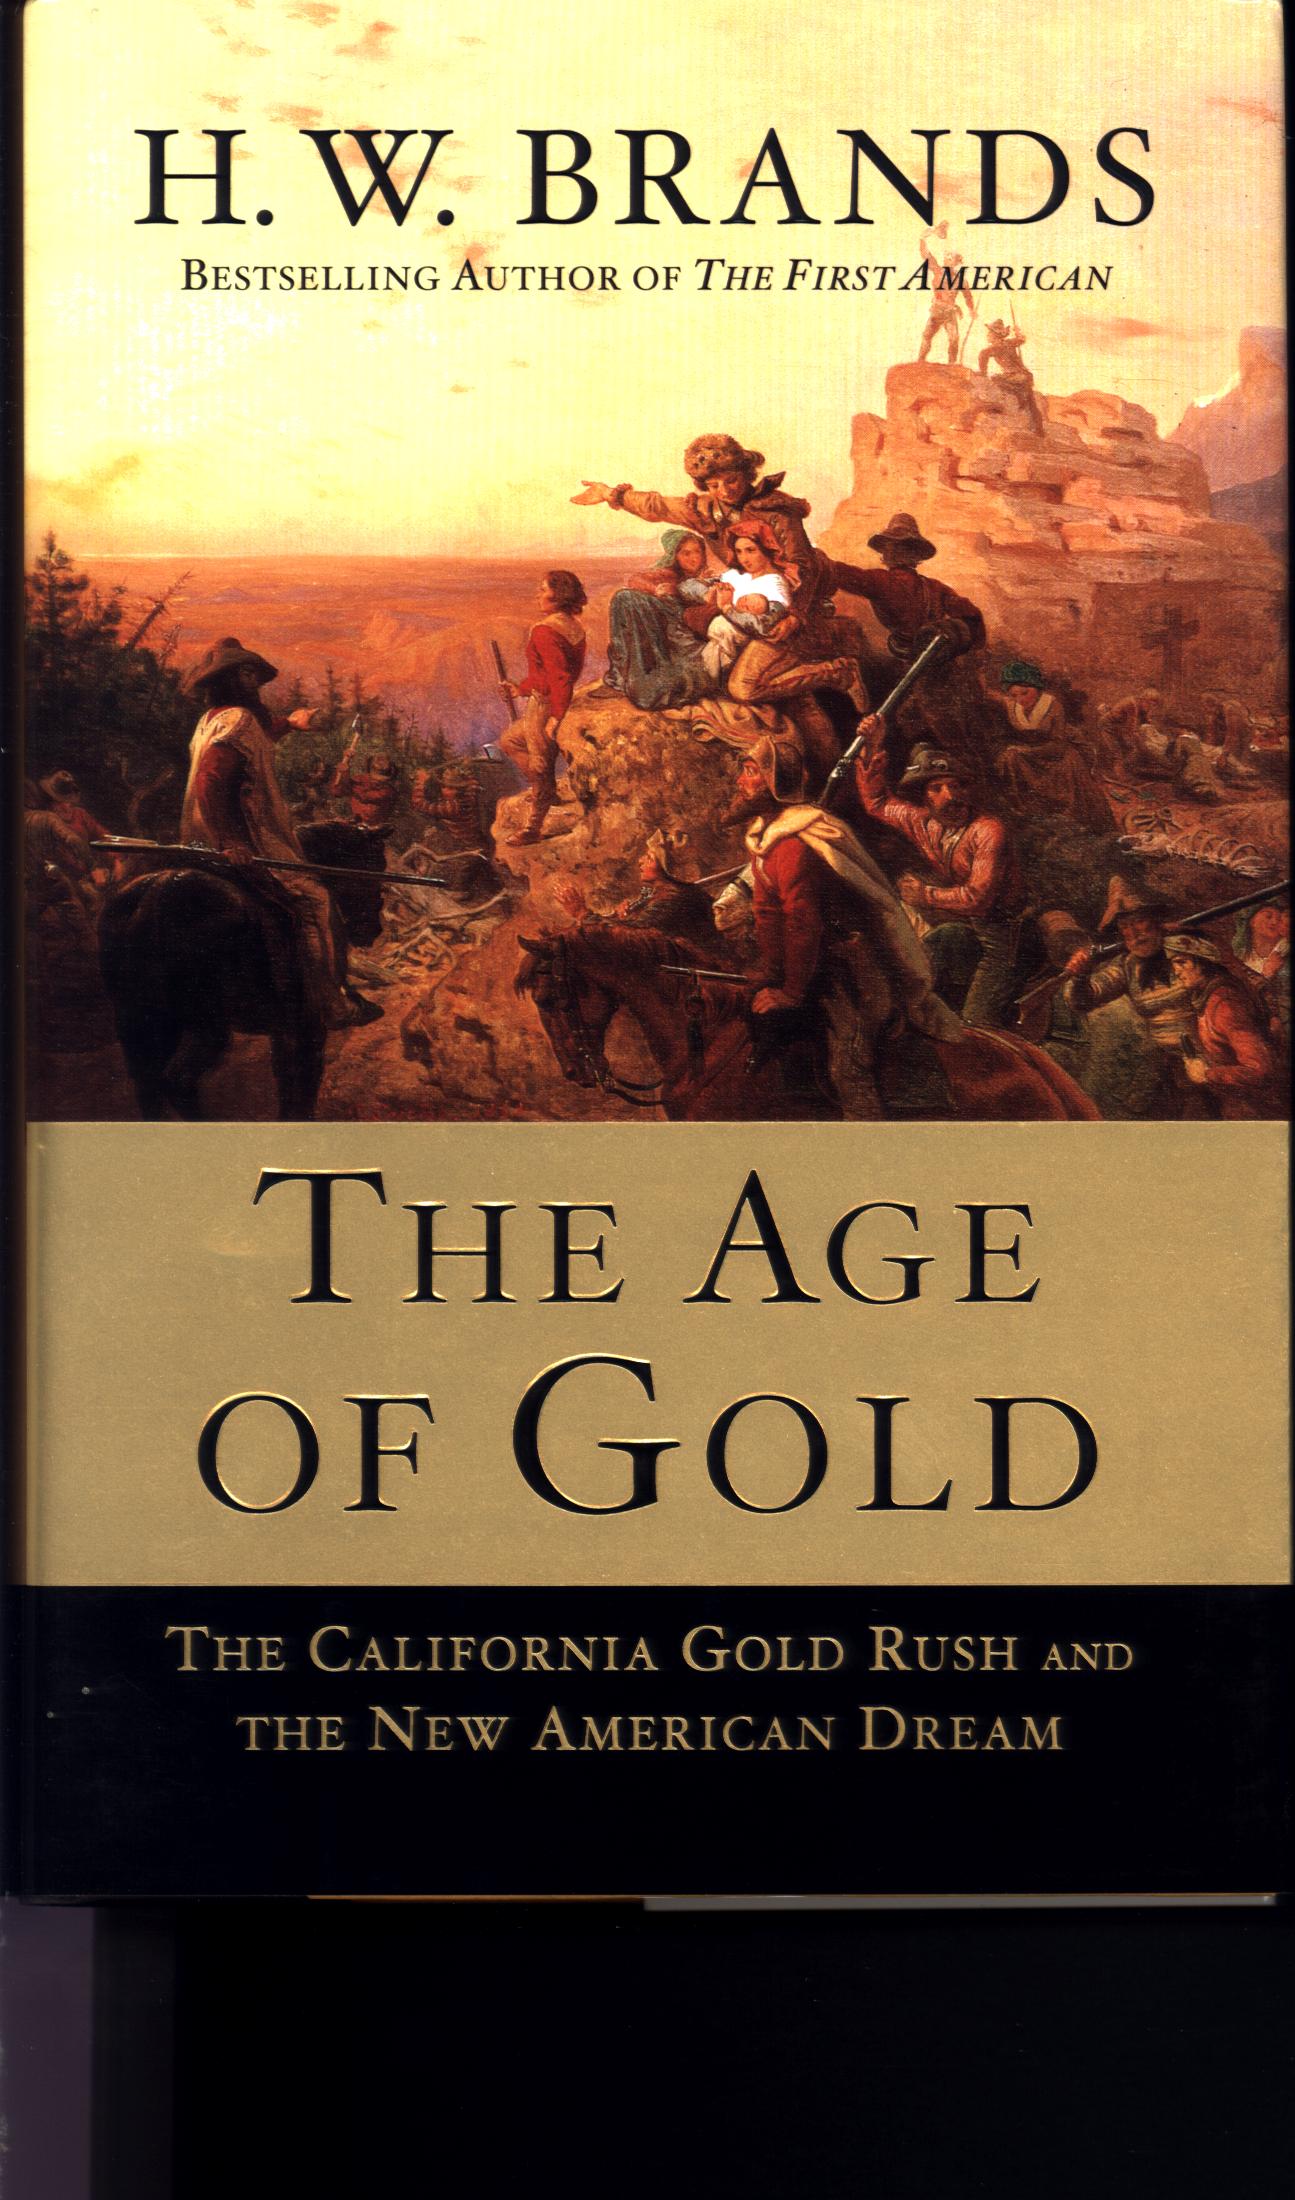 THE AGE OF GOLD: the California gold rush and the new American dream.